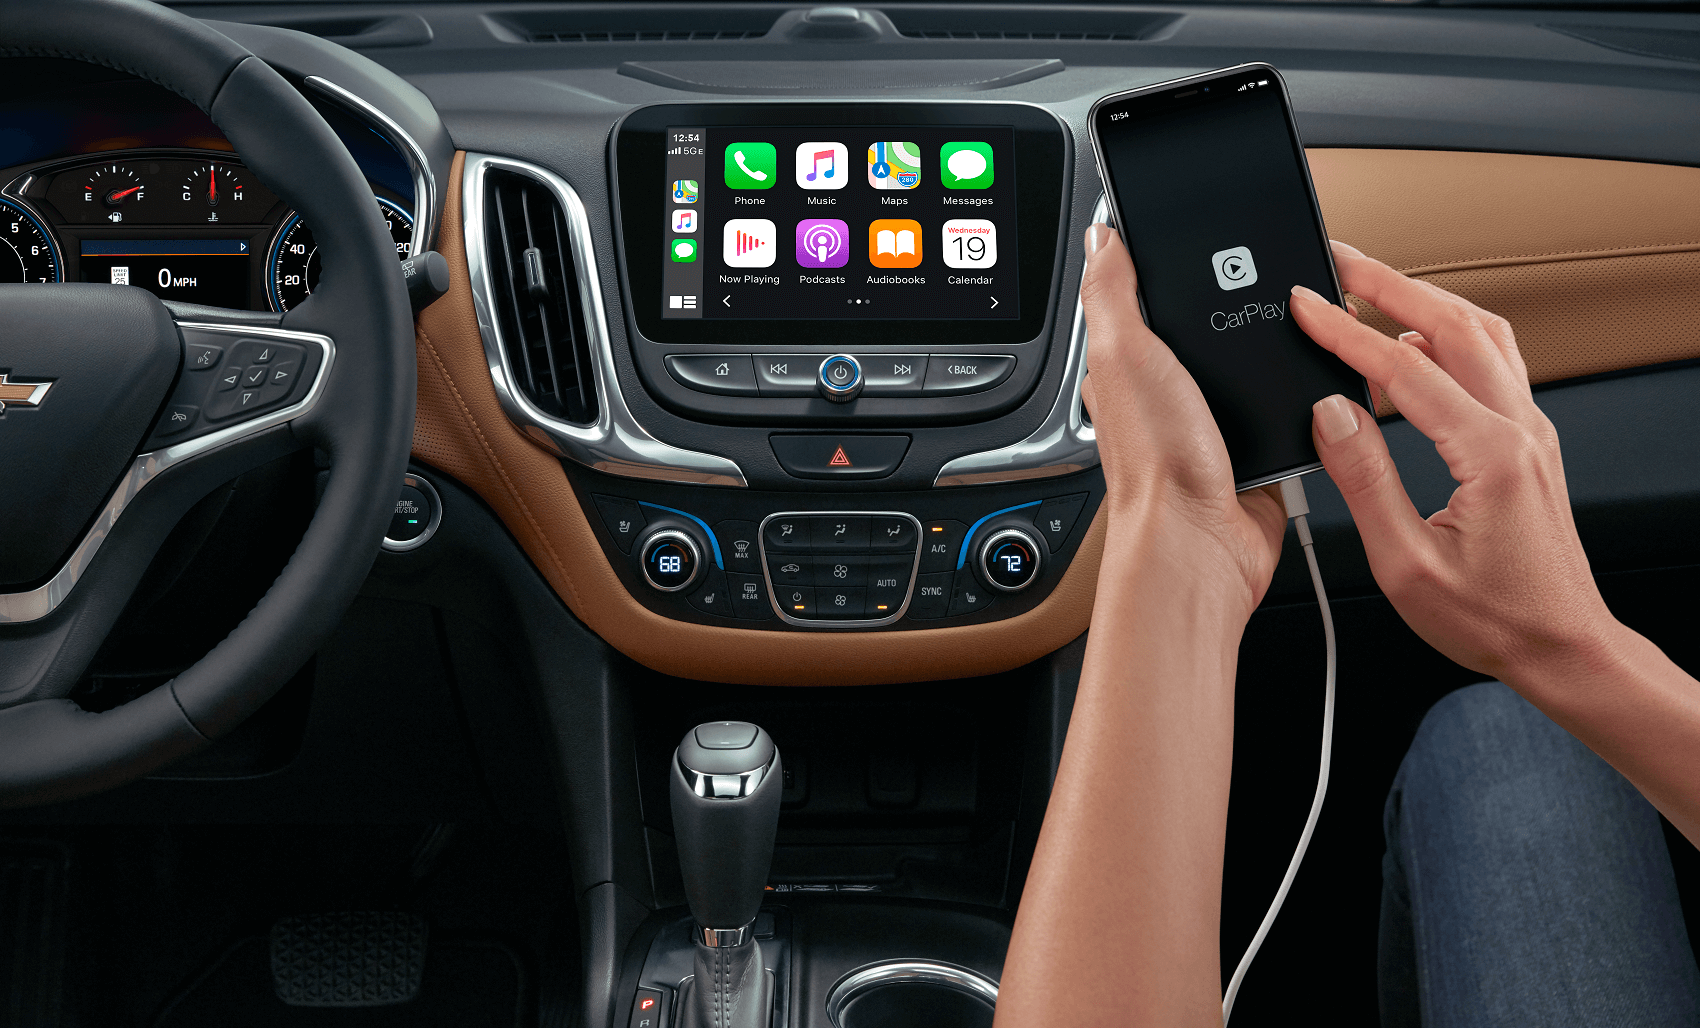 Chevy Equinox black and brown leather interior with Apple Carplay dashboard technology